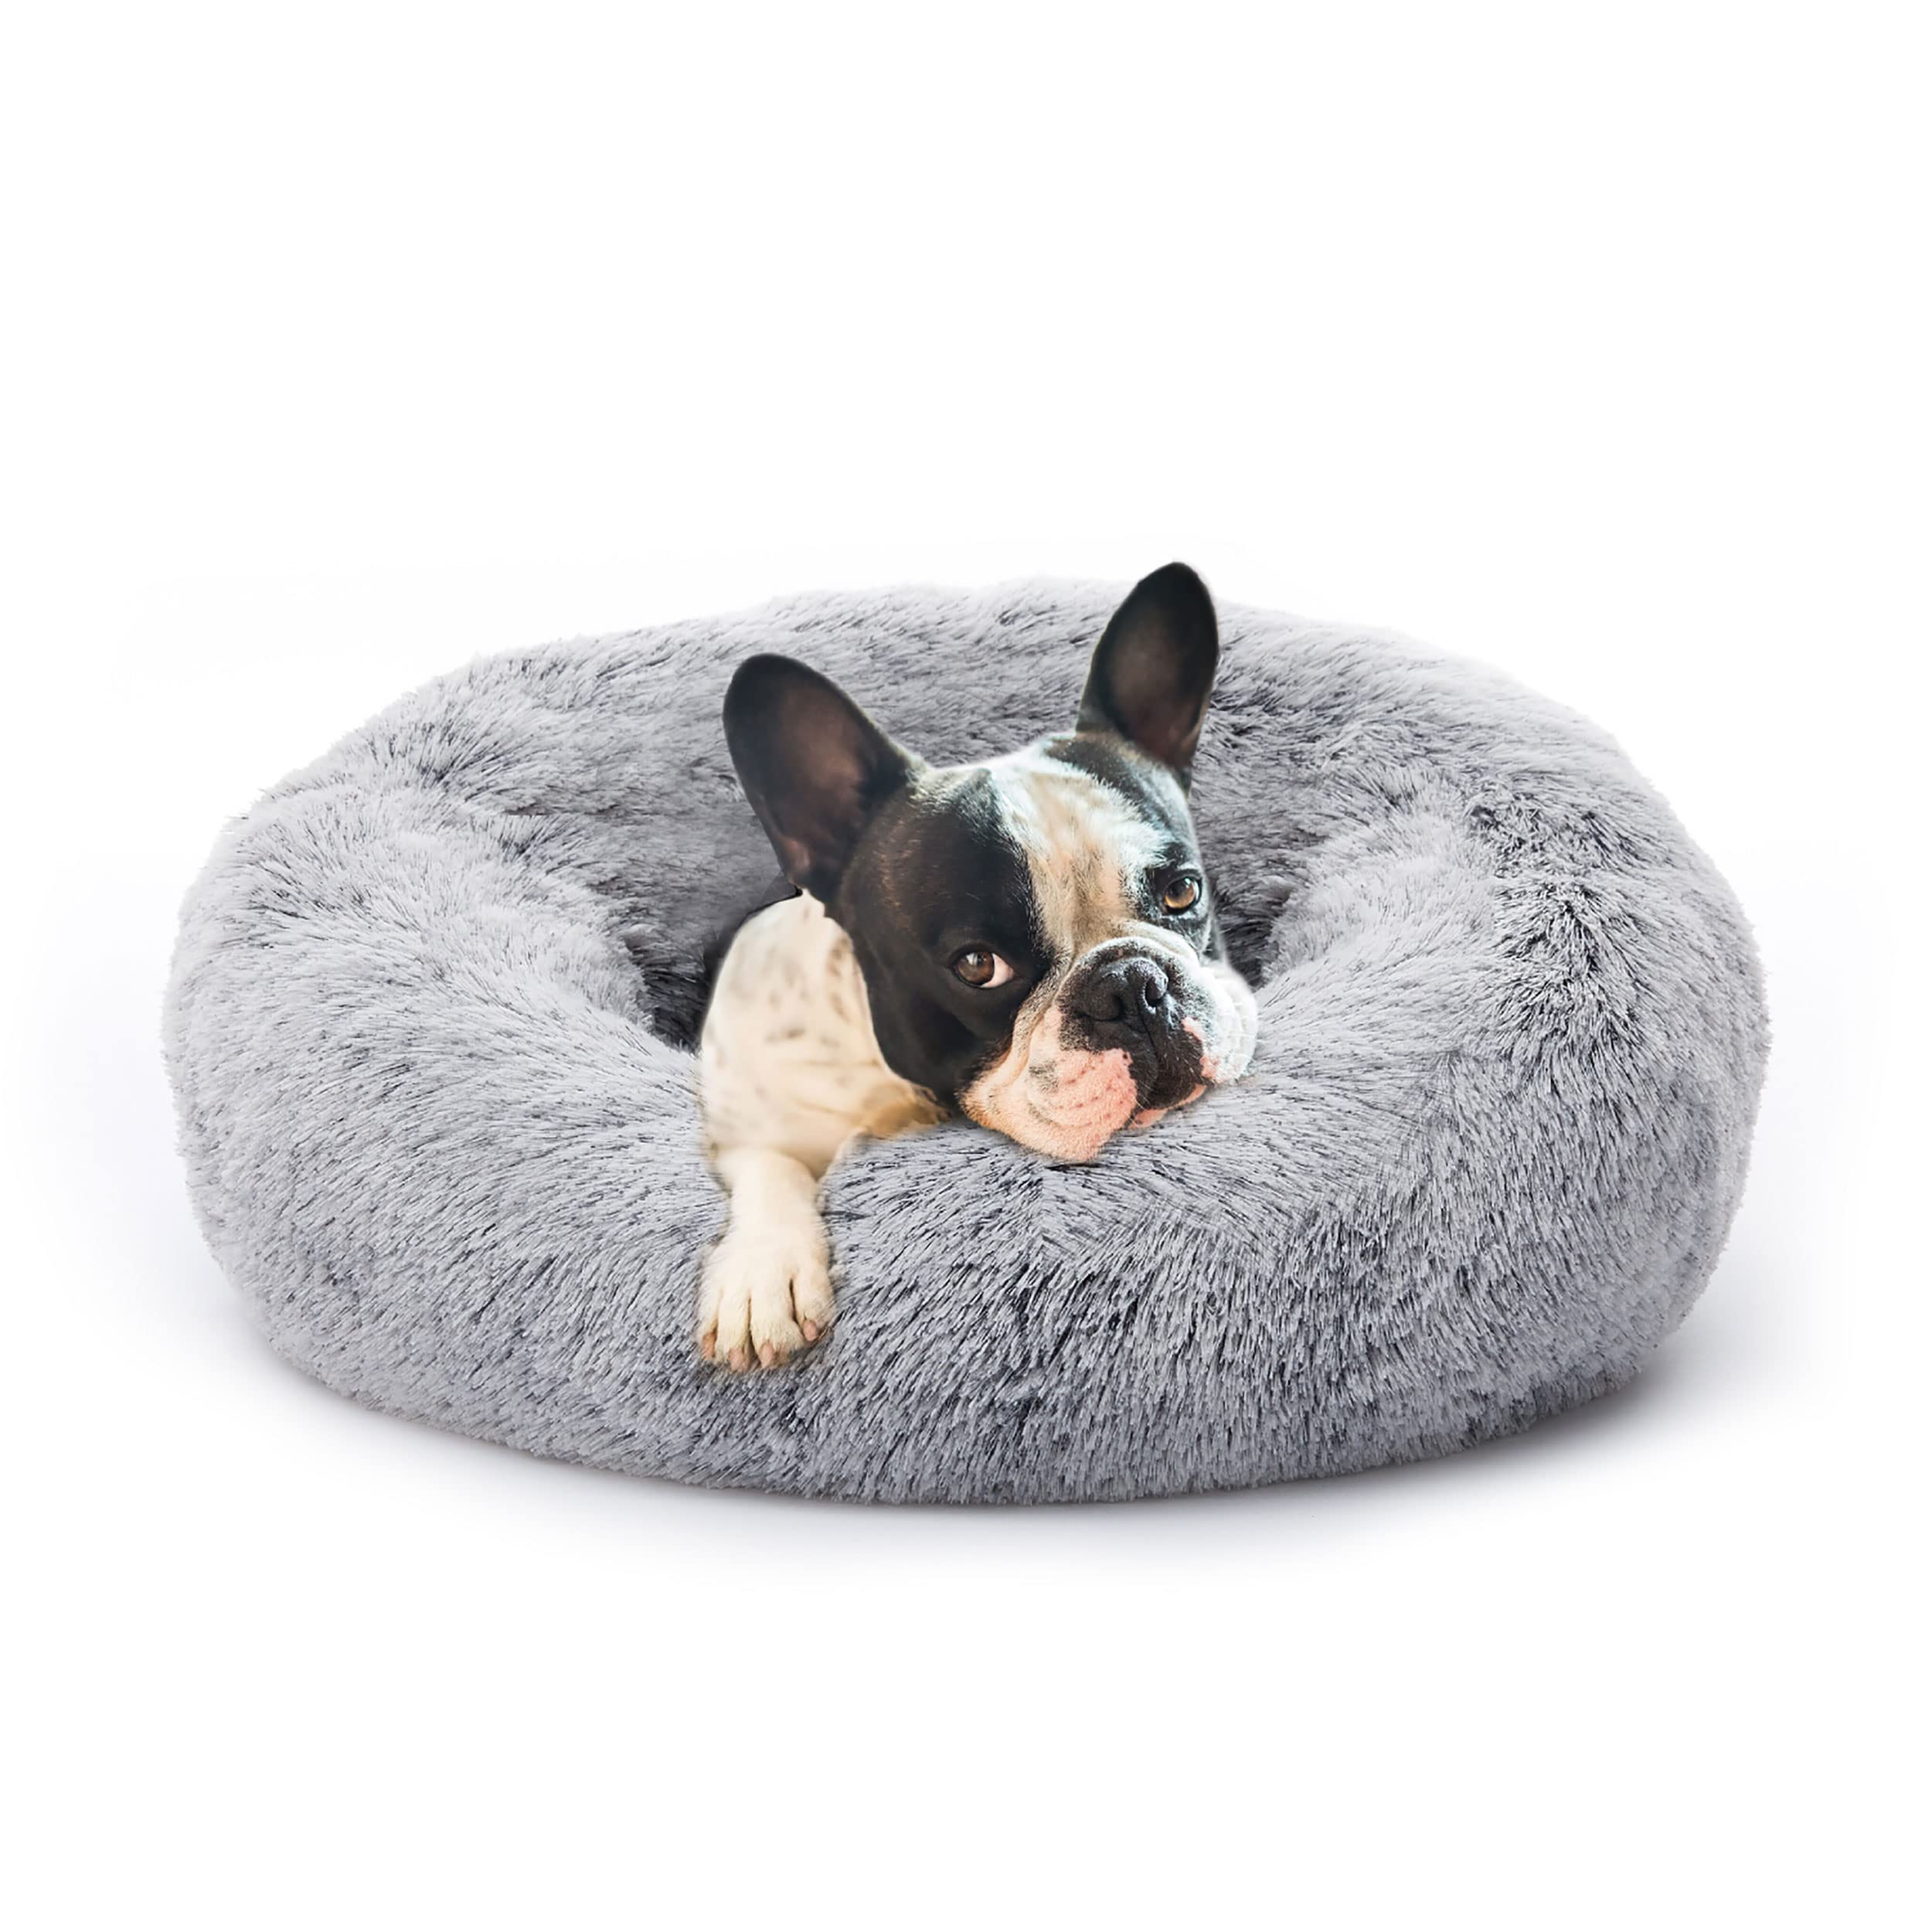 🔥Christmas Sale [50% OFF] Plush Donut Pet Bed - Buy 2 Free Shipping